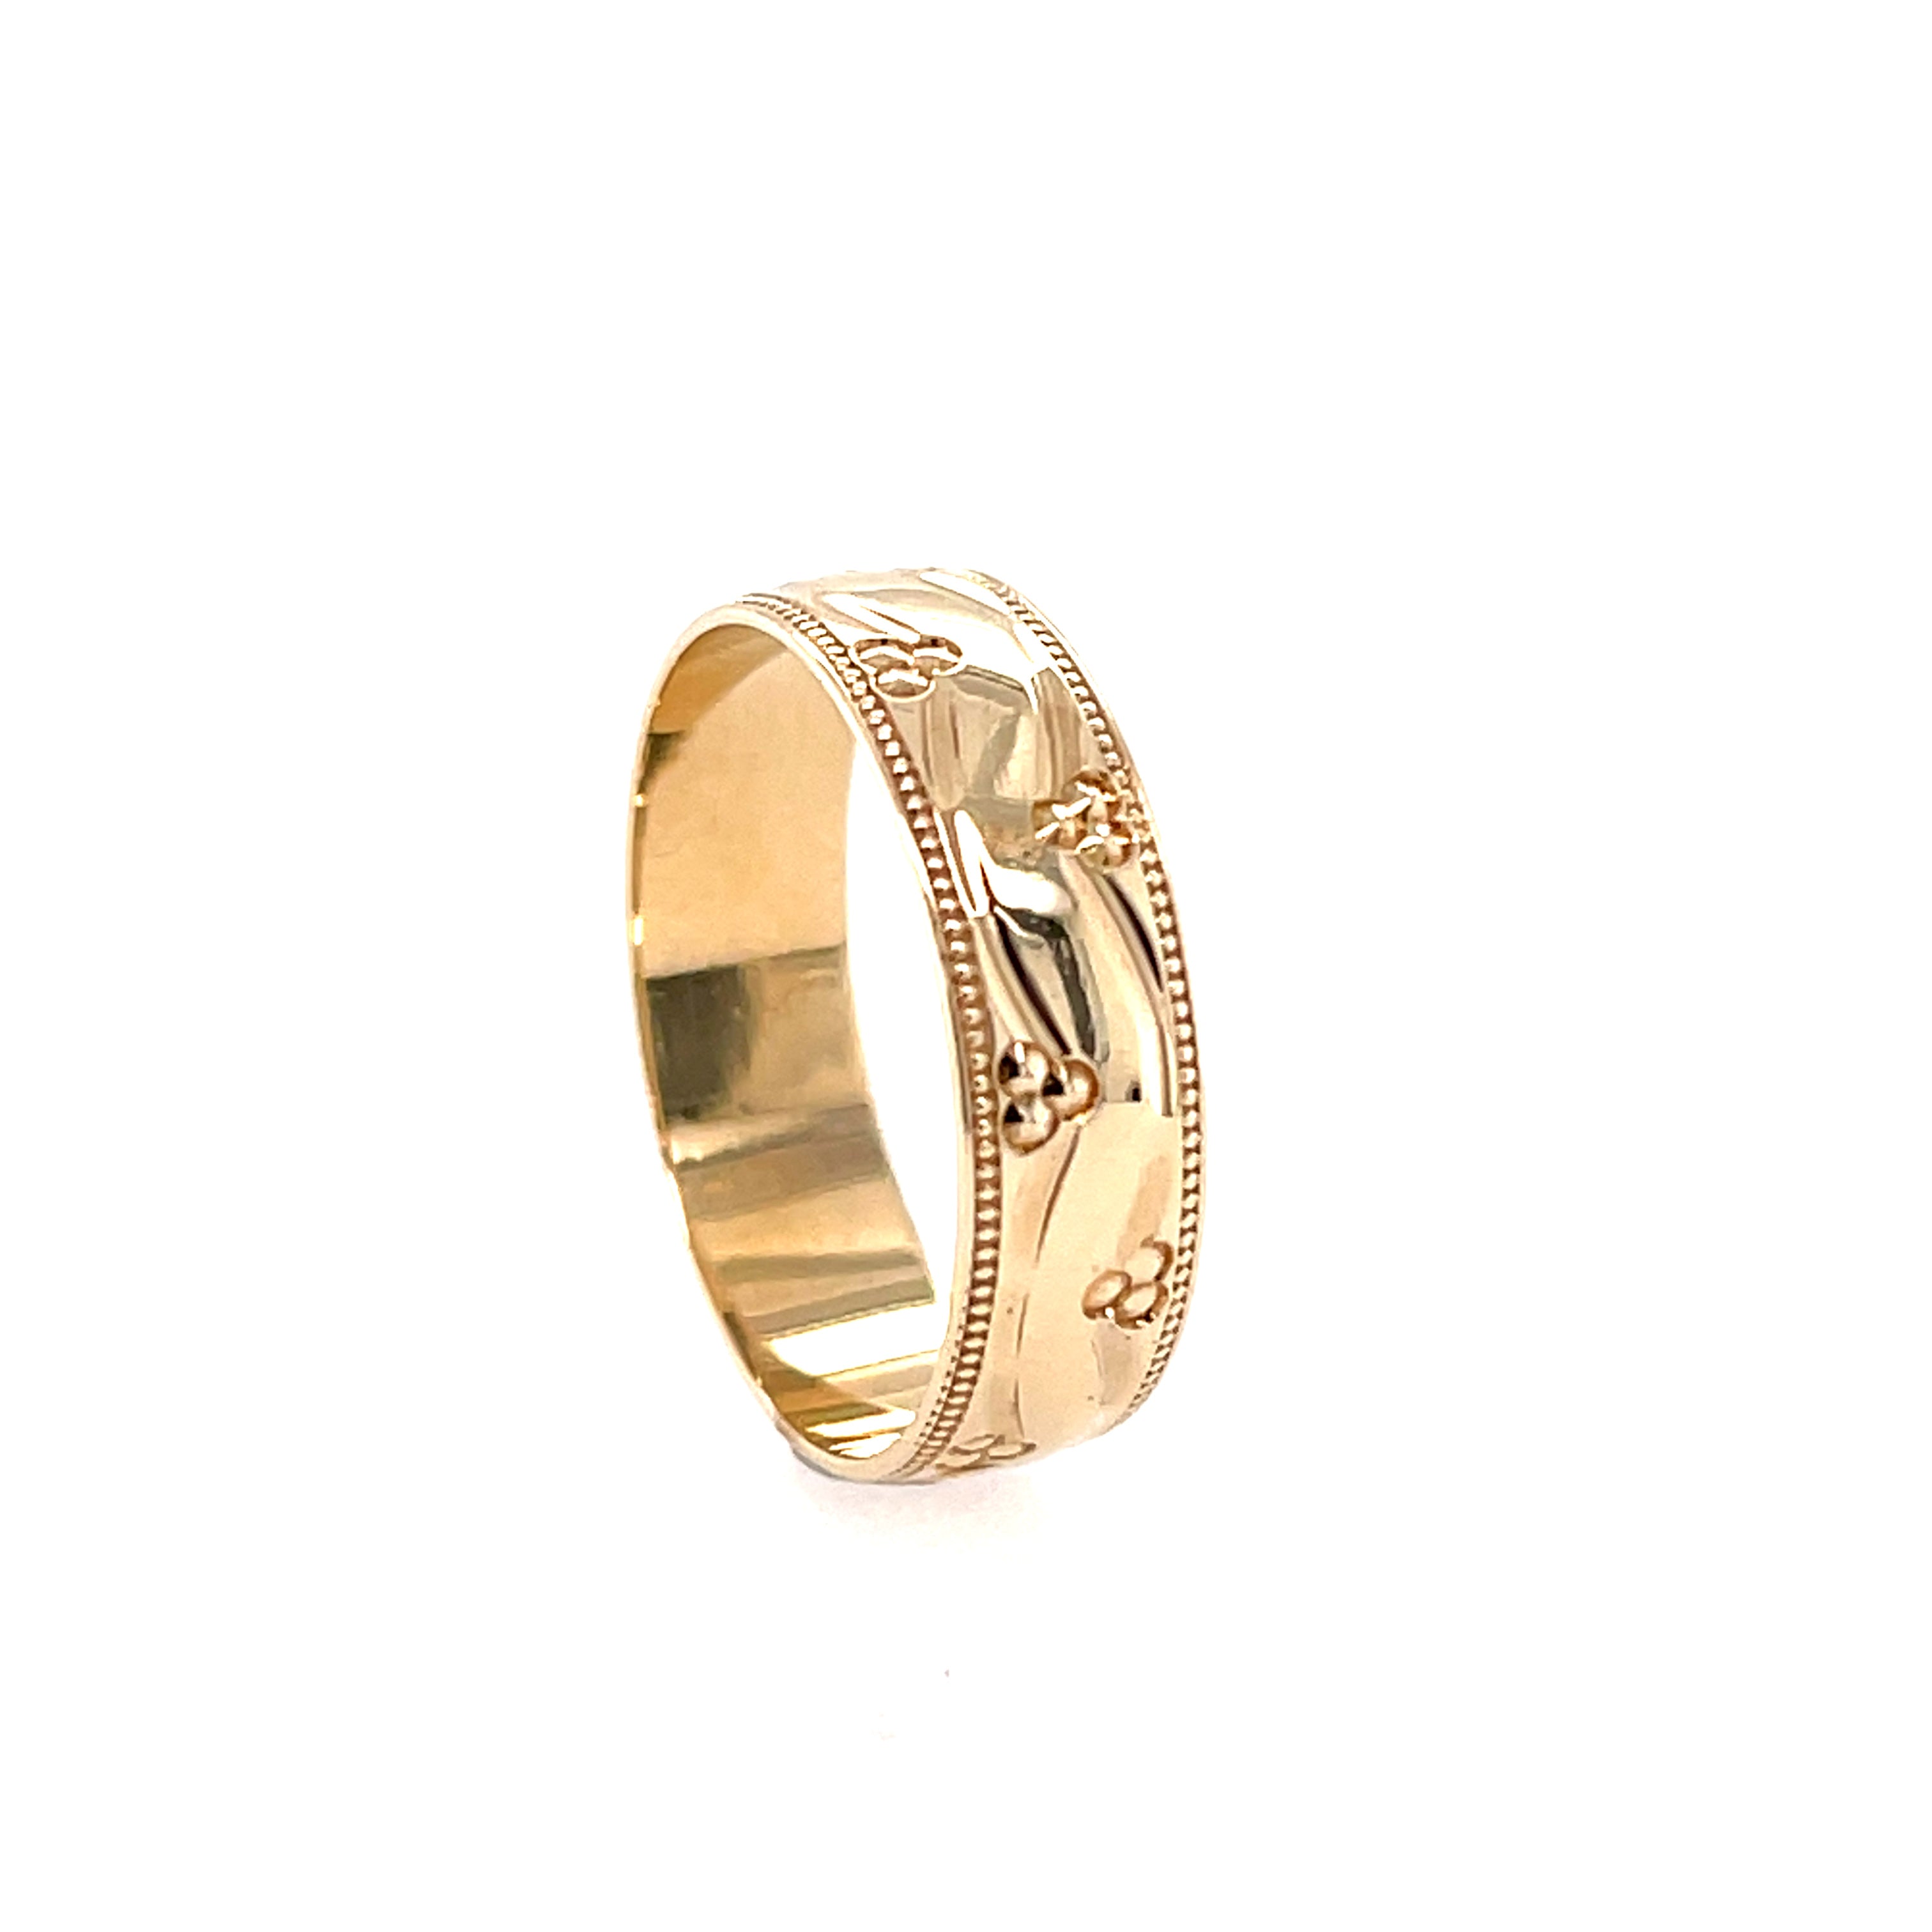 9ct Yellow Gold 5mm Patterned Wedding Band Ring - Size L SOLD